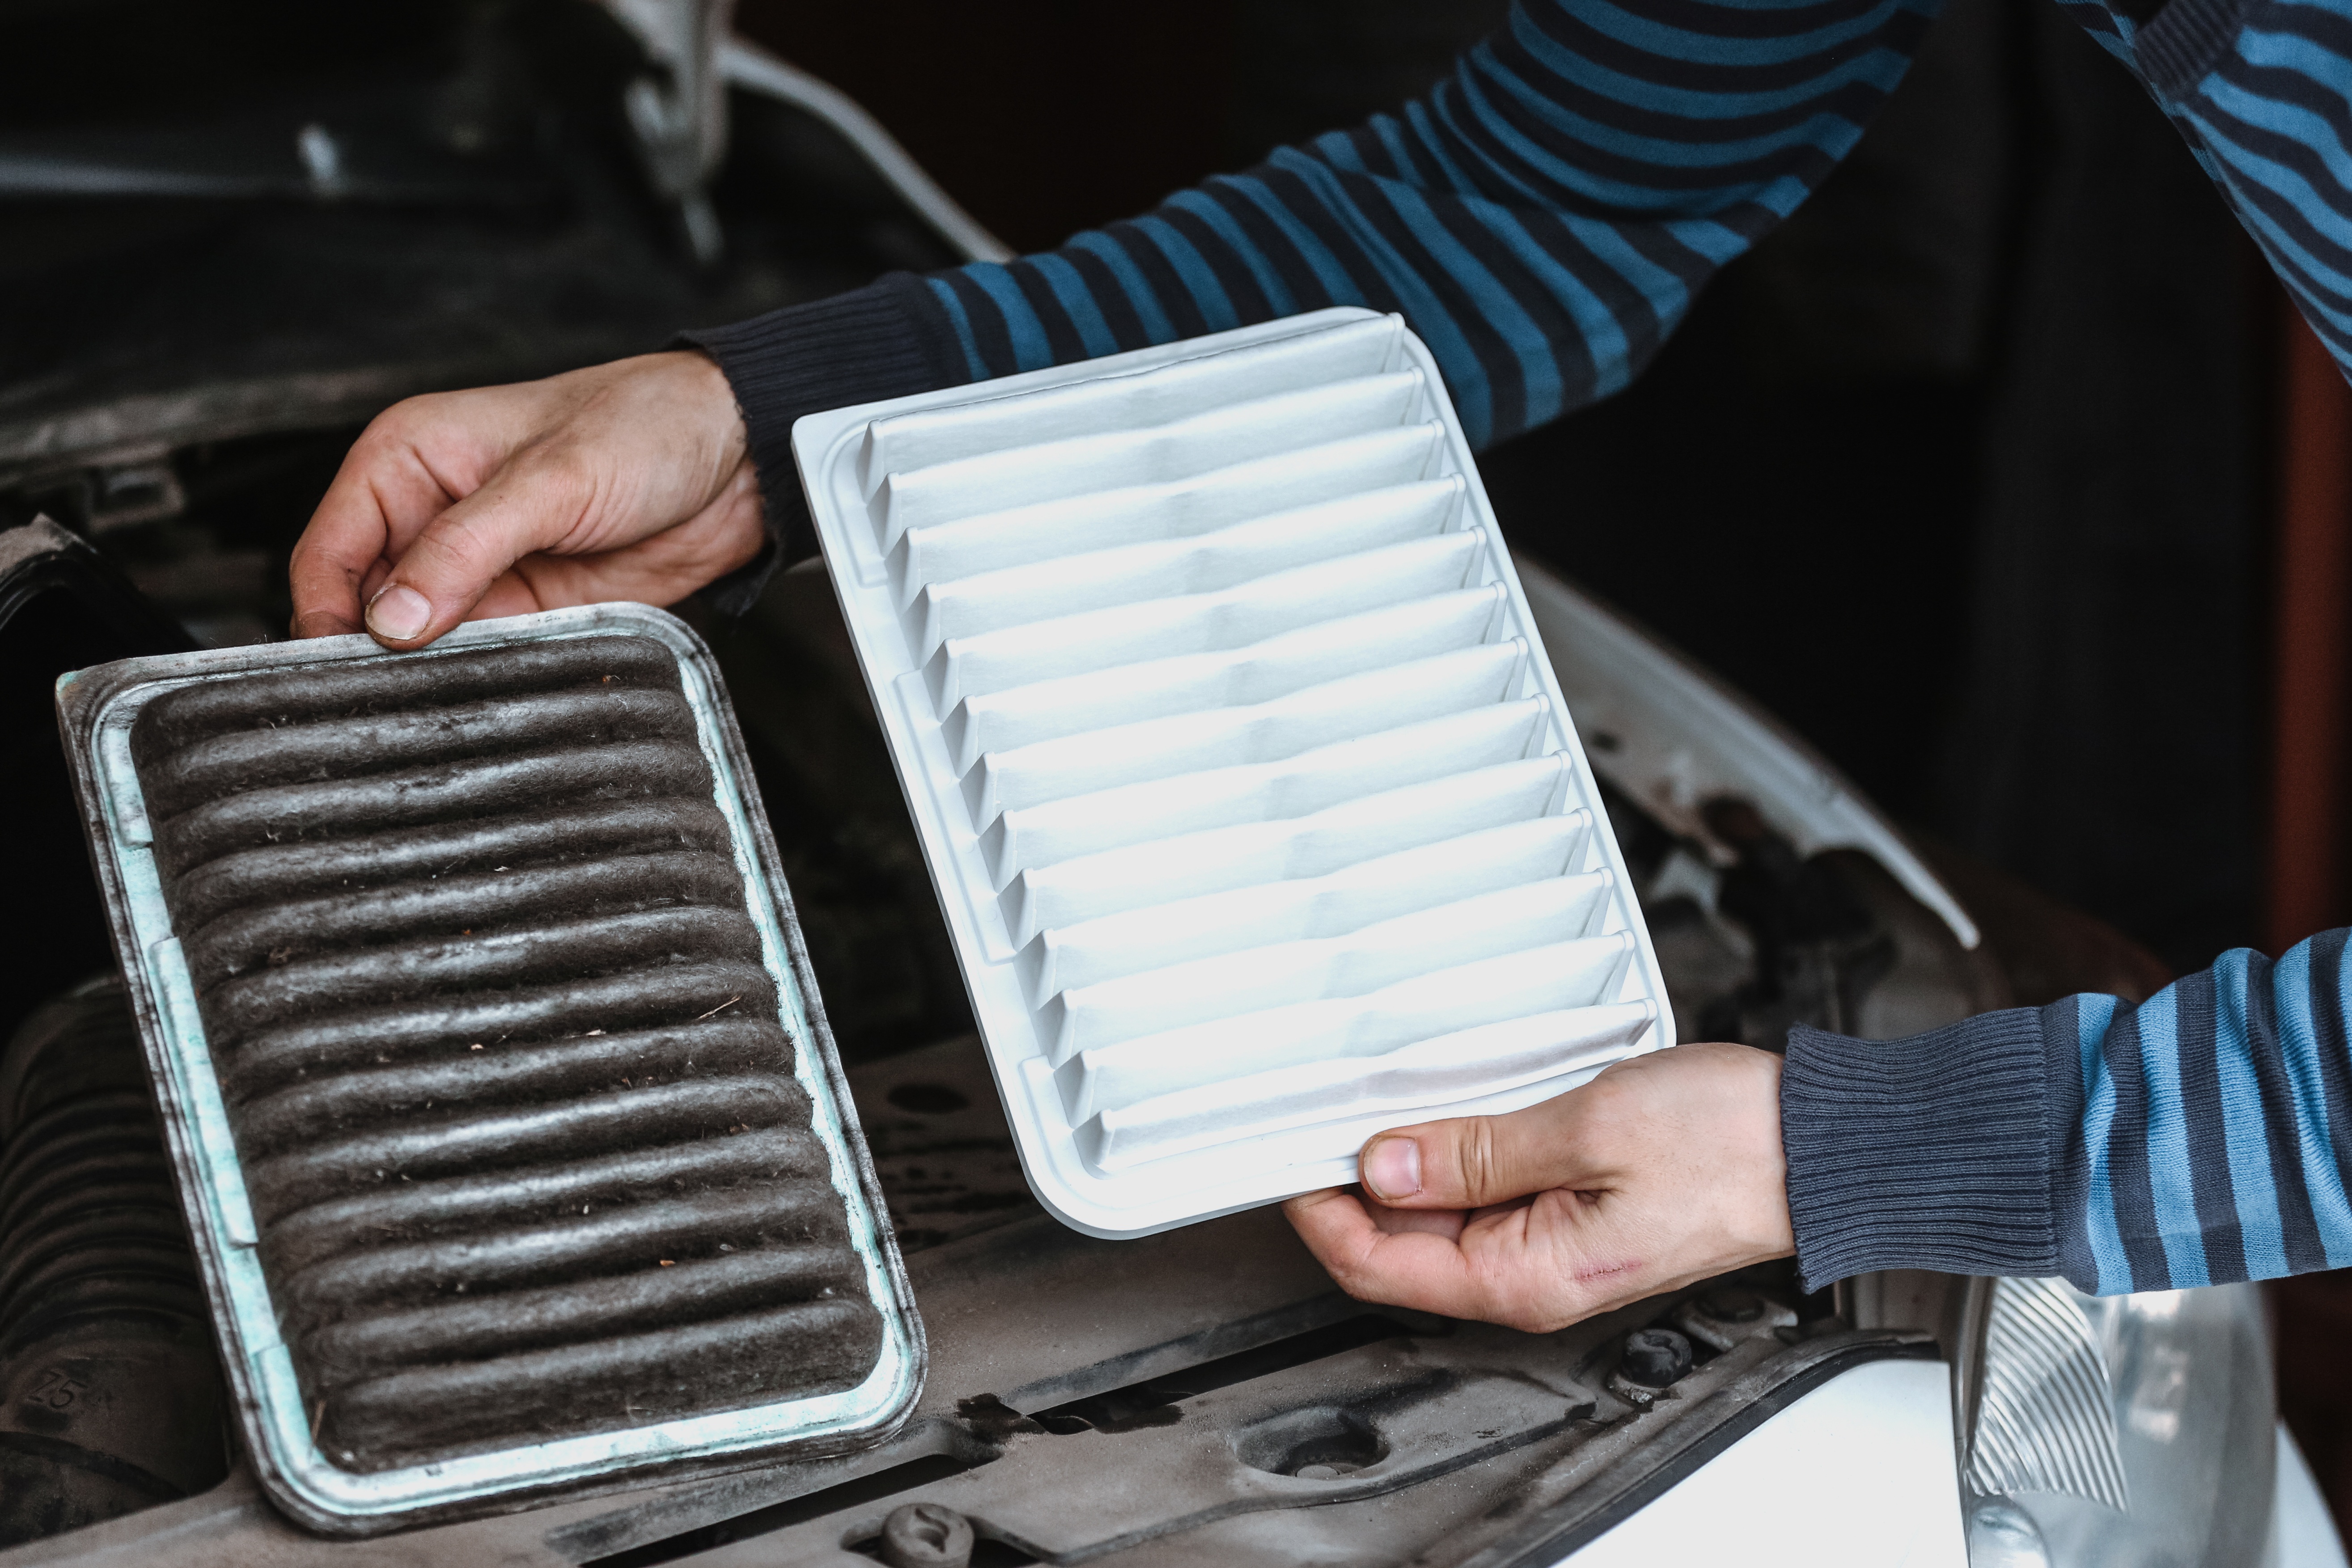 Dirt in your air filter can reduce the airflow, make the car harder to cool and even affect your health